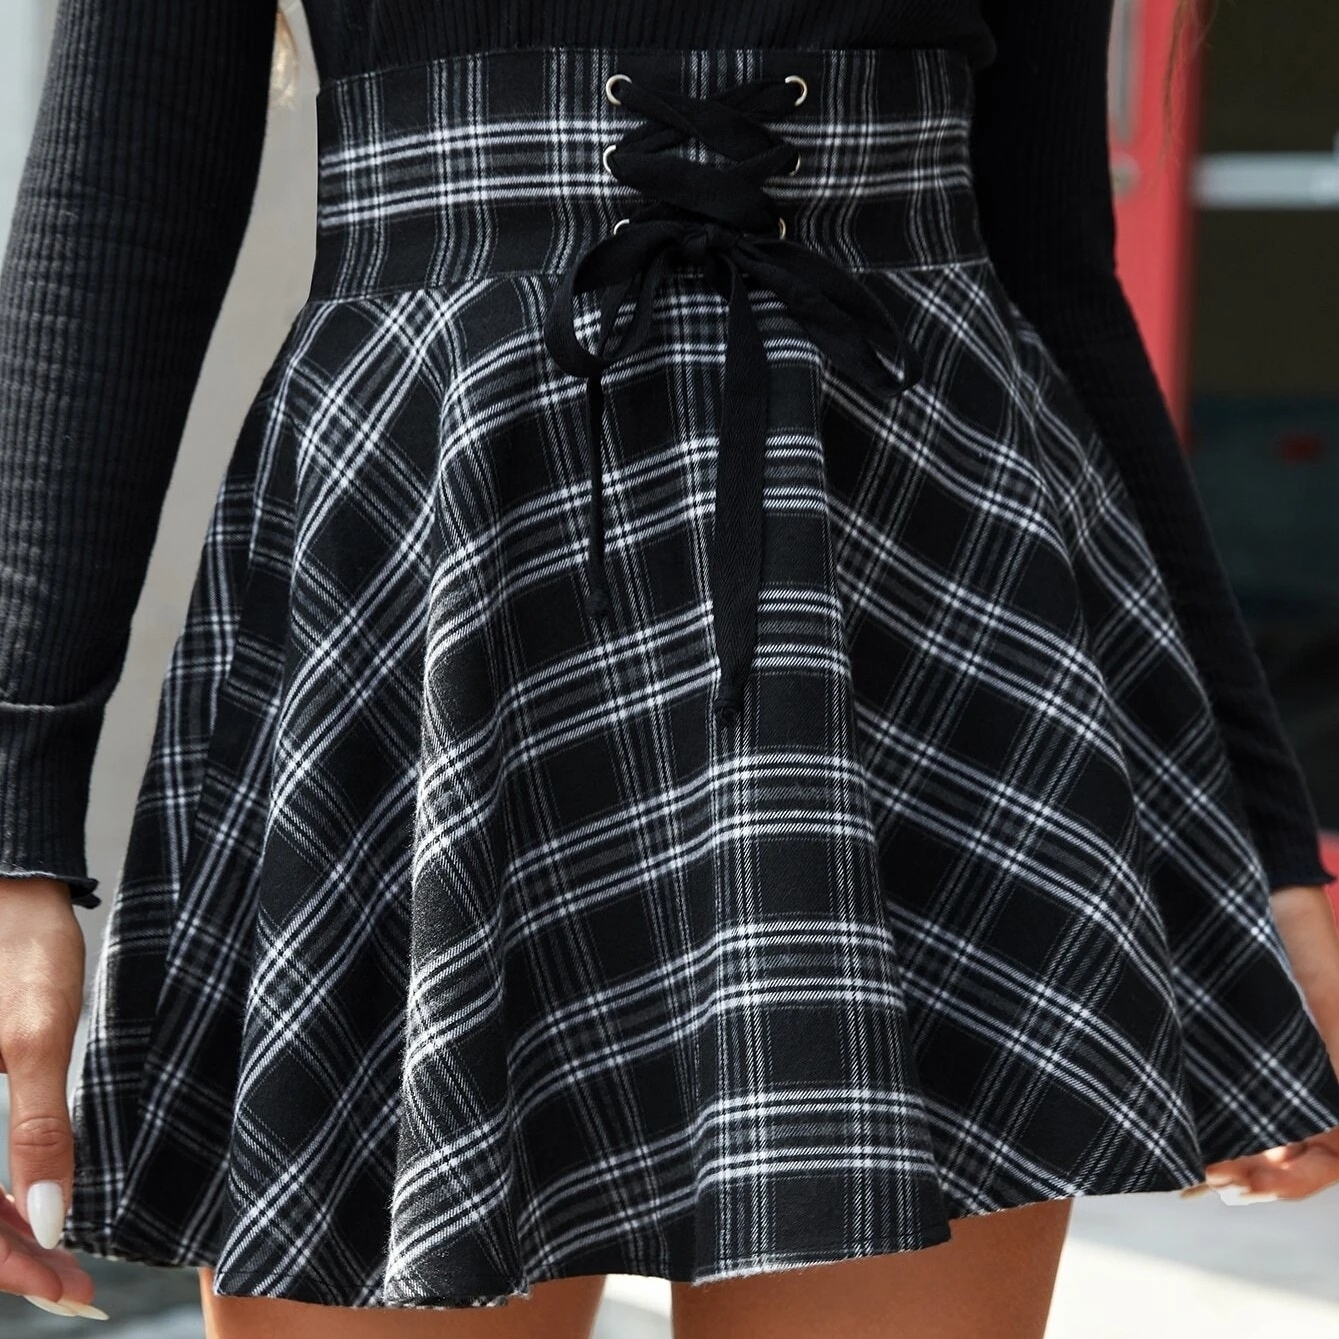 Tartan Print Lace Up Front Flared Skirt - L